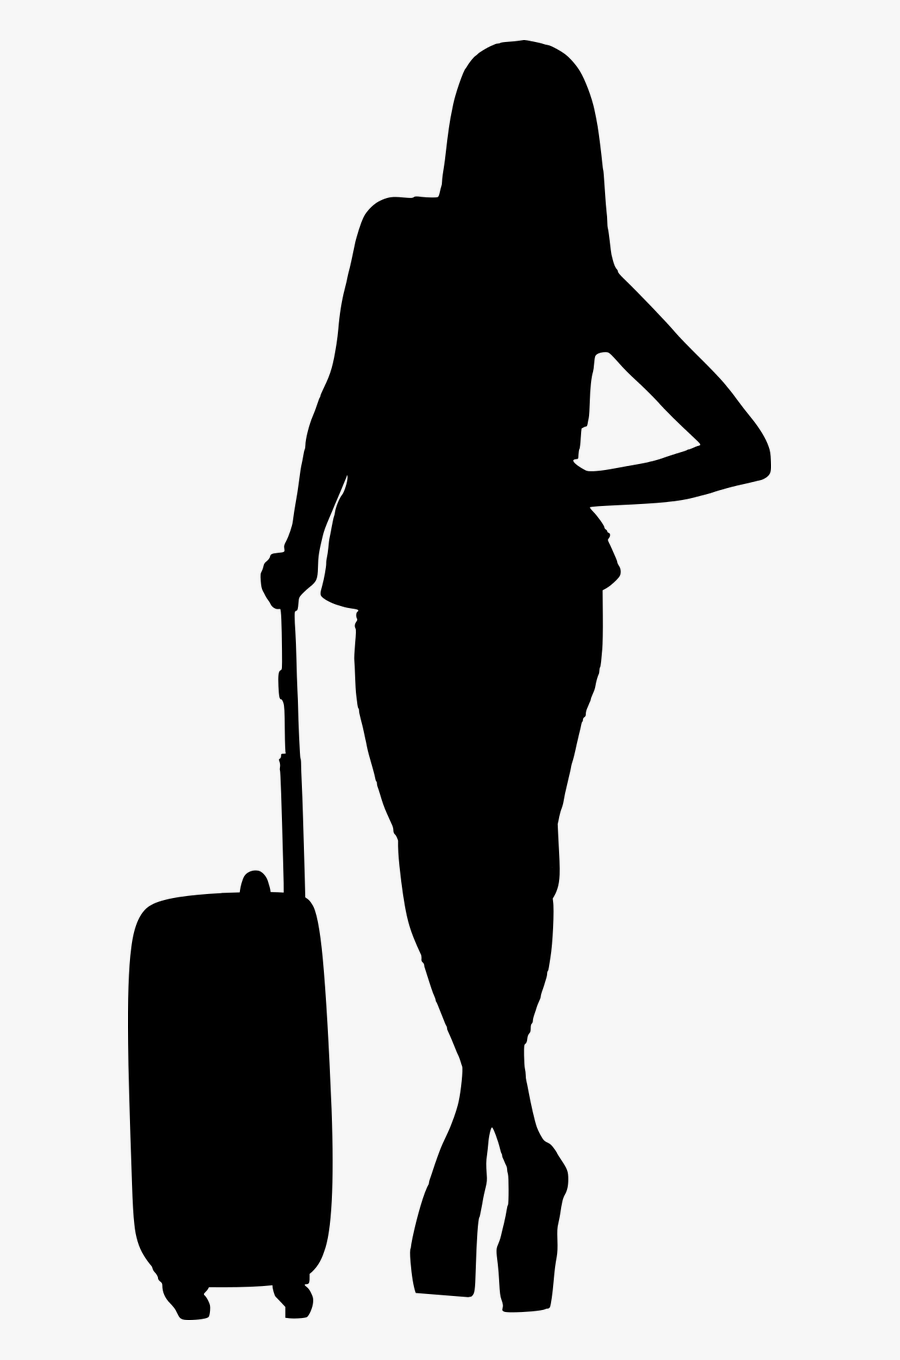 Free Download Travel Silhouette At Getdrawings Com - Travel Woman Silhouette, Transparent Clipart